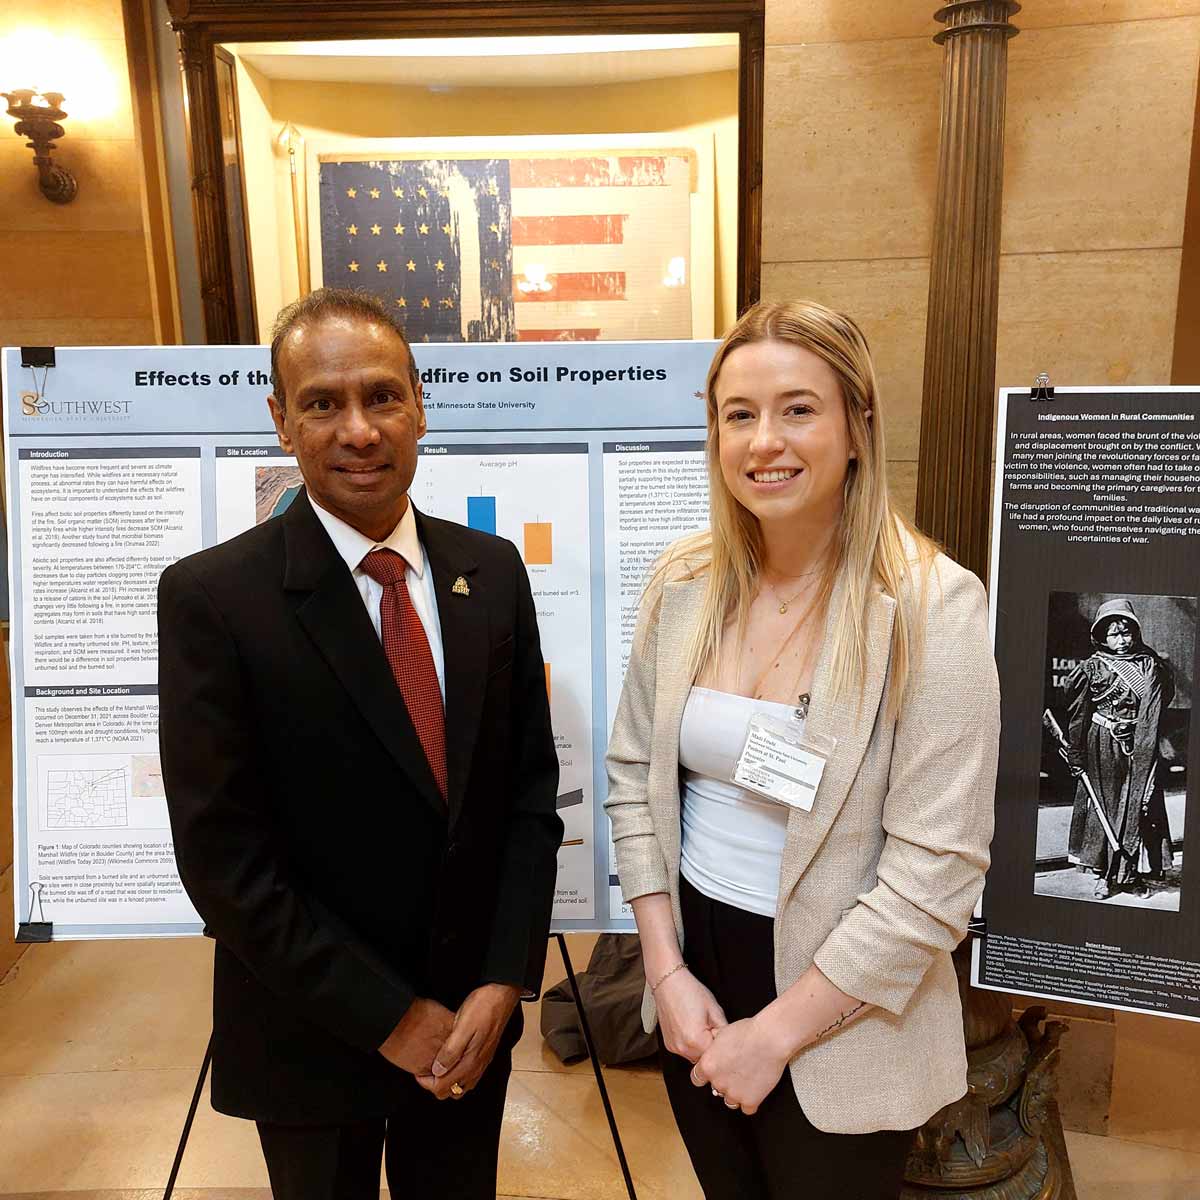 Six SMSU Students Participate in Posters at St. Paul Event